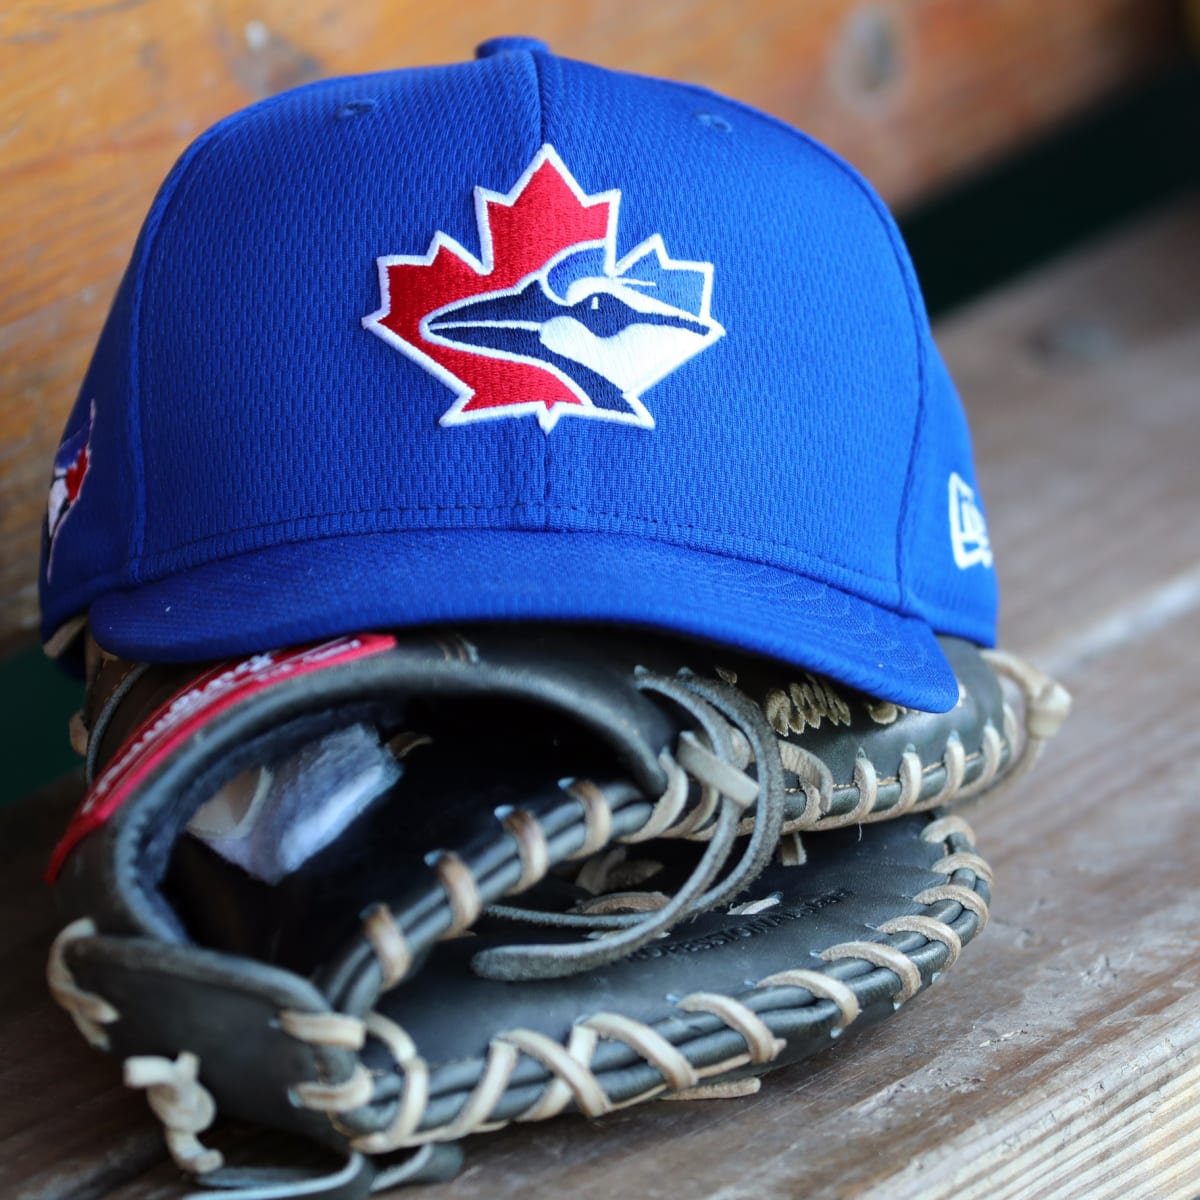 Blue Jays Players Told 'Not to Rush' Spring Training